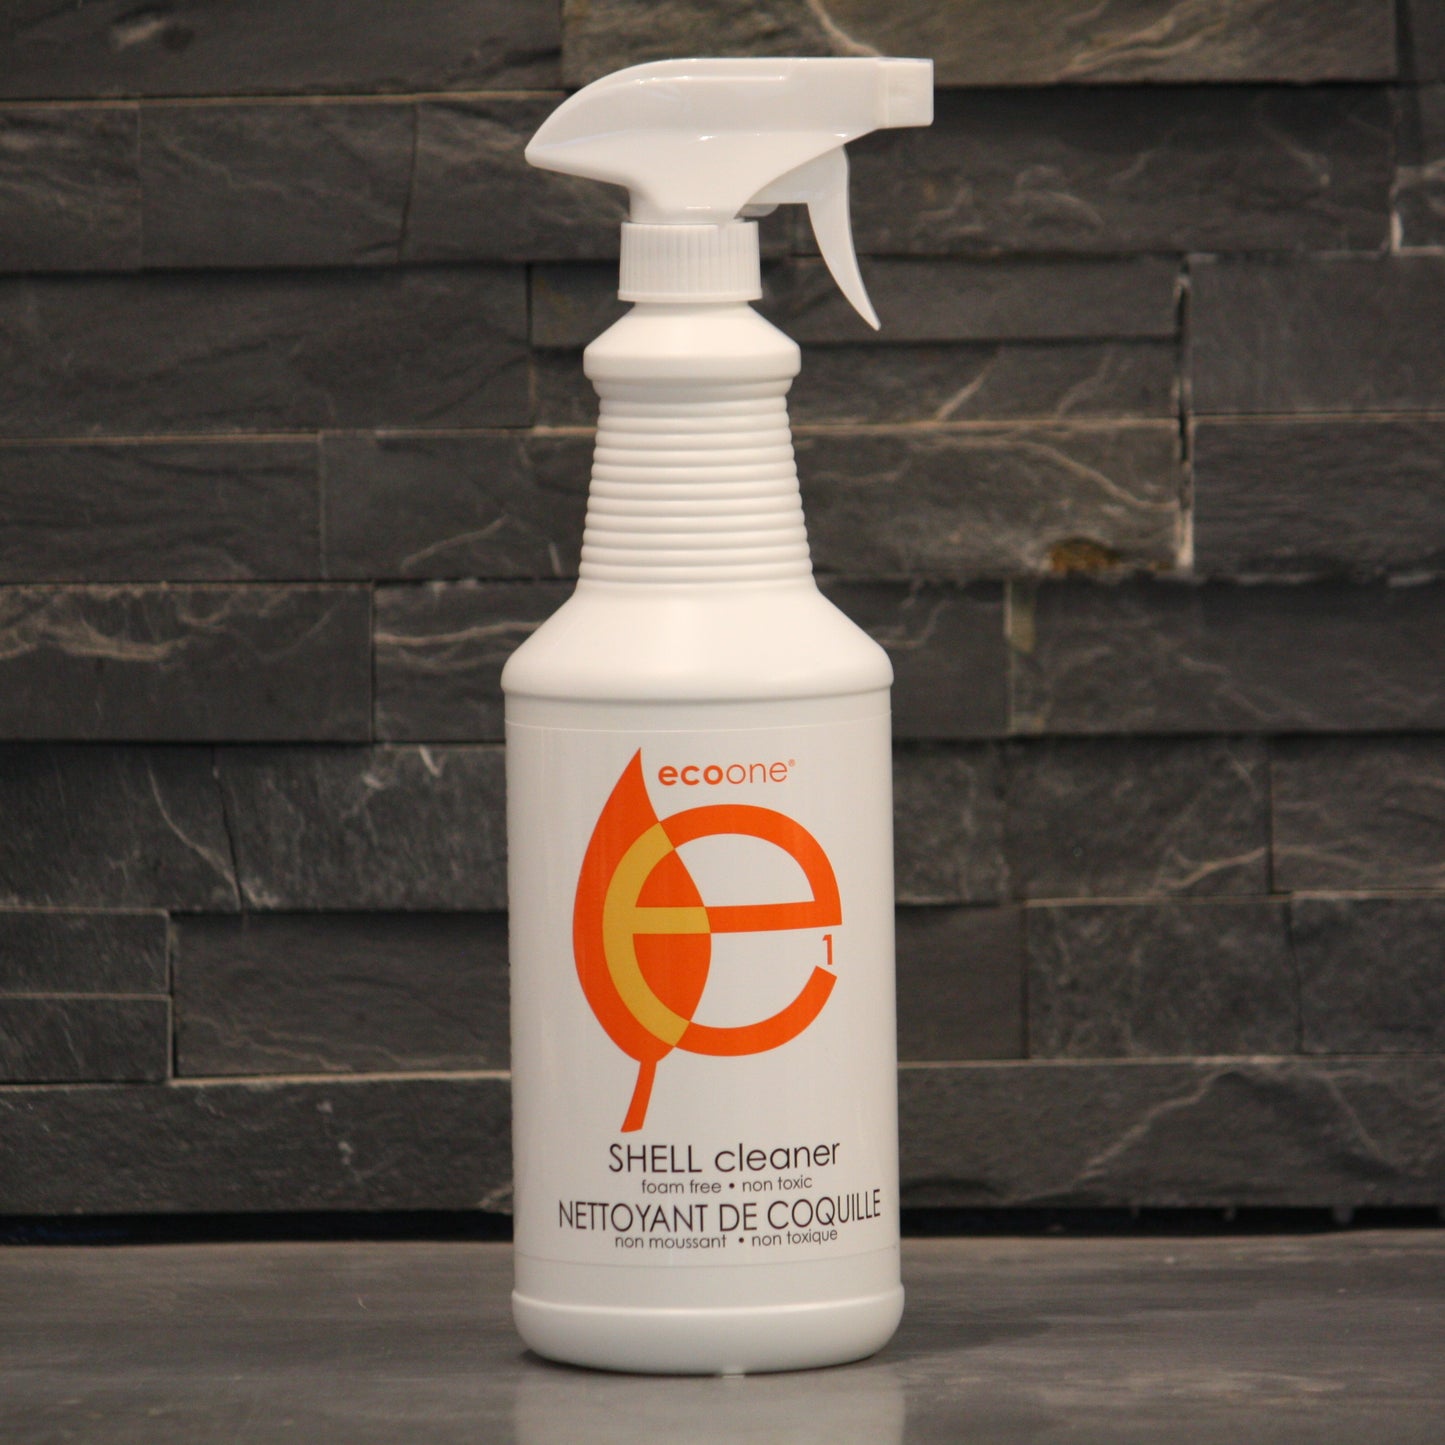 Eco-one Shell Cleaner